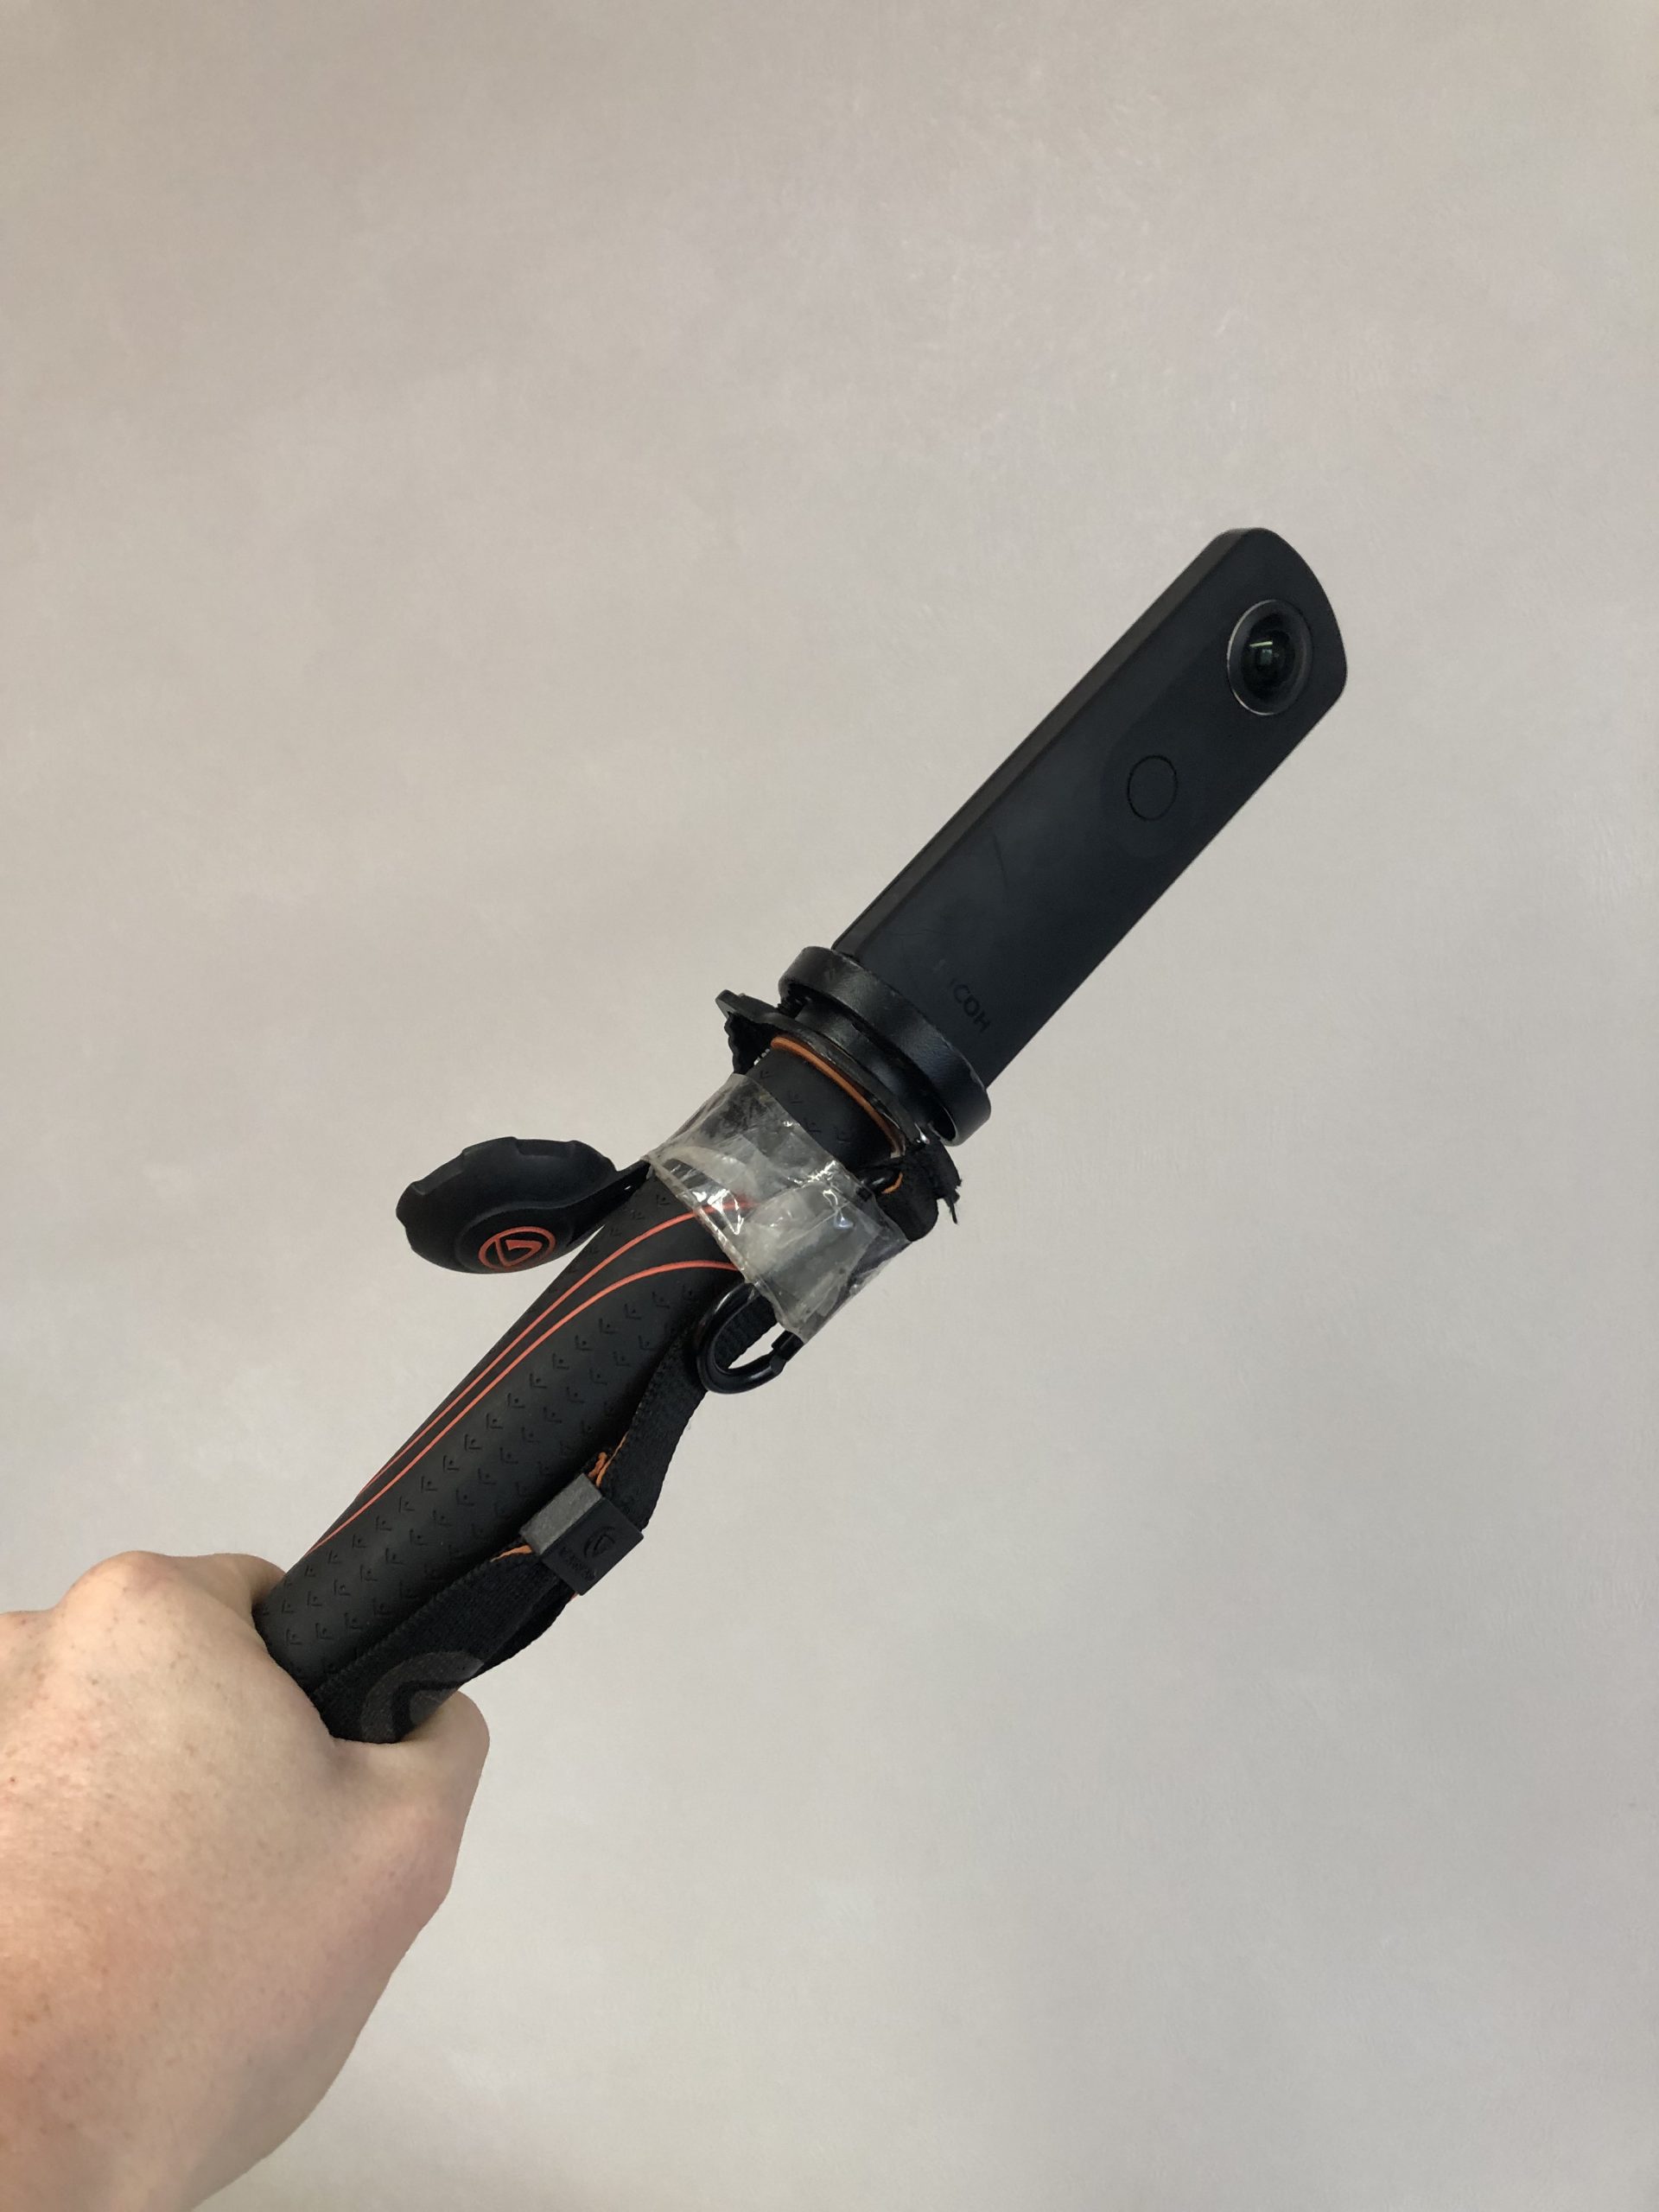 Picture of a Richo Theta camera being held in a hand 